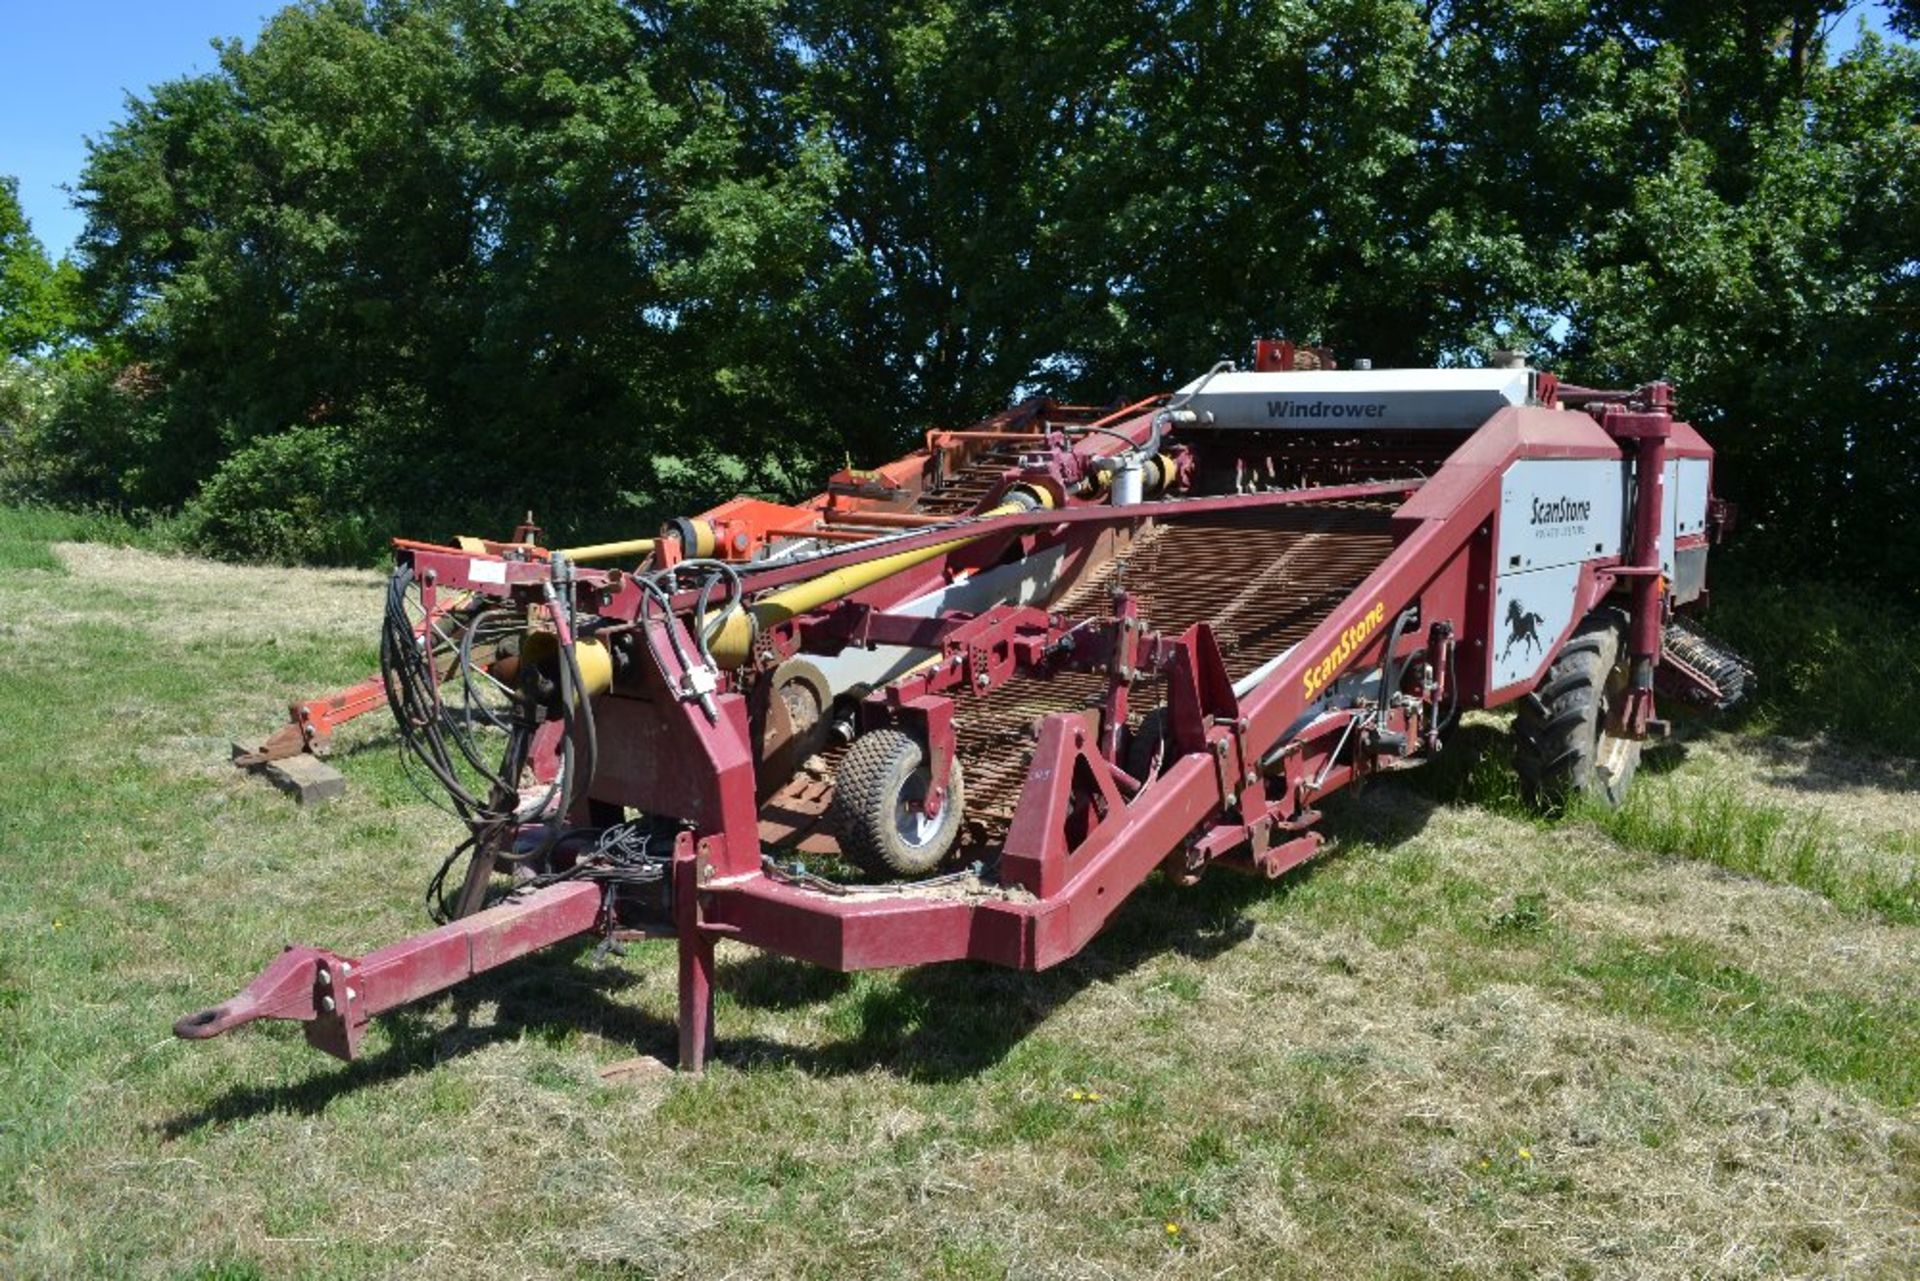 Scanstone trailed Windrower. Model WD17-2+5. 2014. Serial number 2030. Set for 72" beds. LM - Image 29 of 29